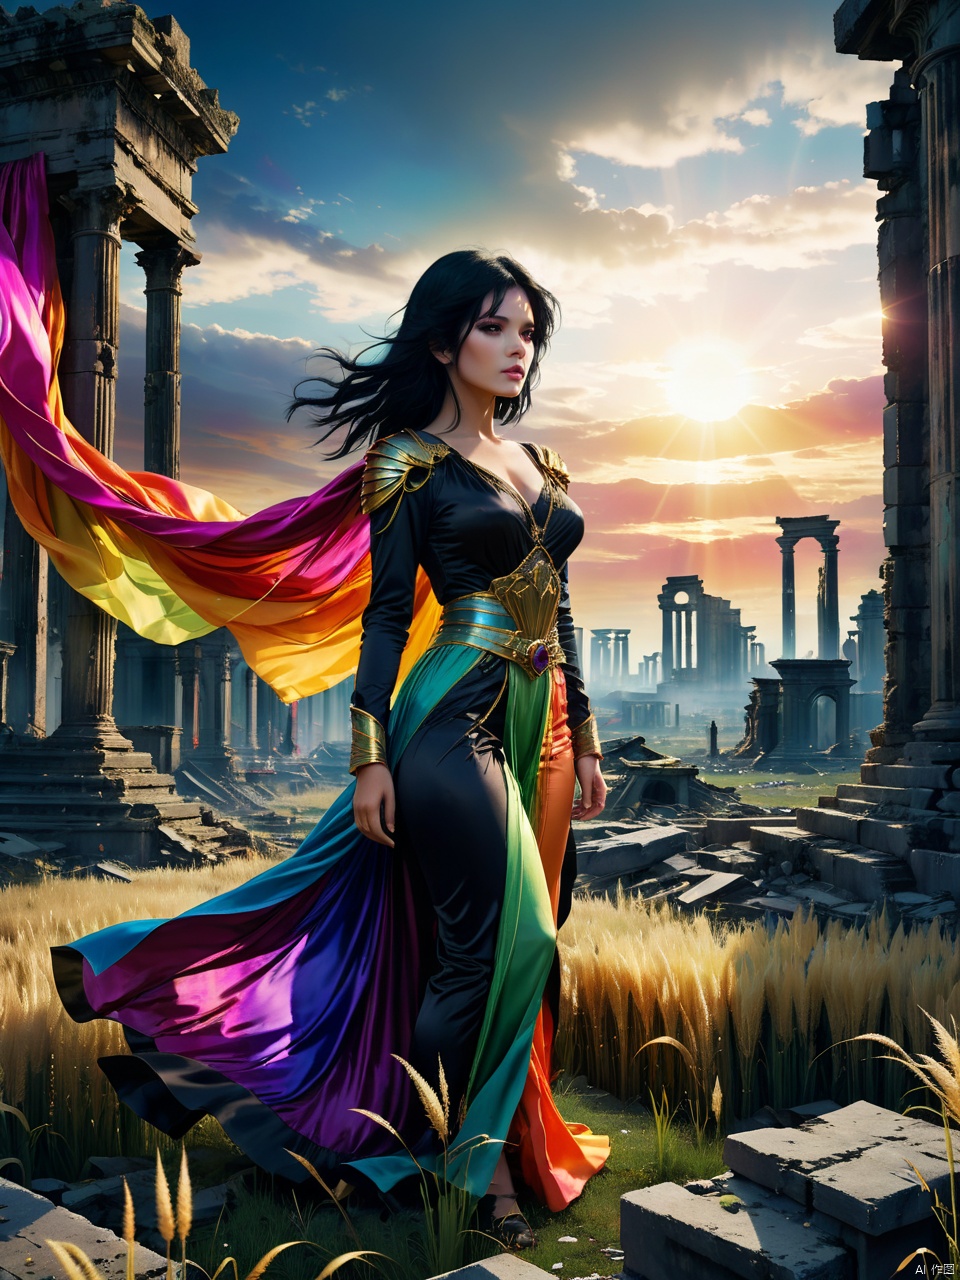 In the midst of the messy wild grass on the ruins of the apocalypse, a dazzling girl stands there, wearing colorful silks and satins, with her black hair flying freely. Her warm and determined gaze brings light to the darkness and hope to the desolation. The cinematographic quality, medium shot, making the background hazy and giving a high-quality masterpiece., shining, science fiction, surespace